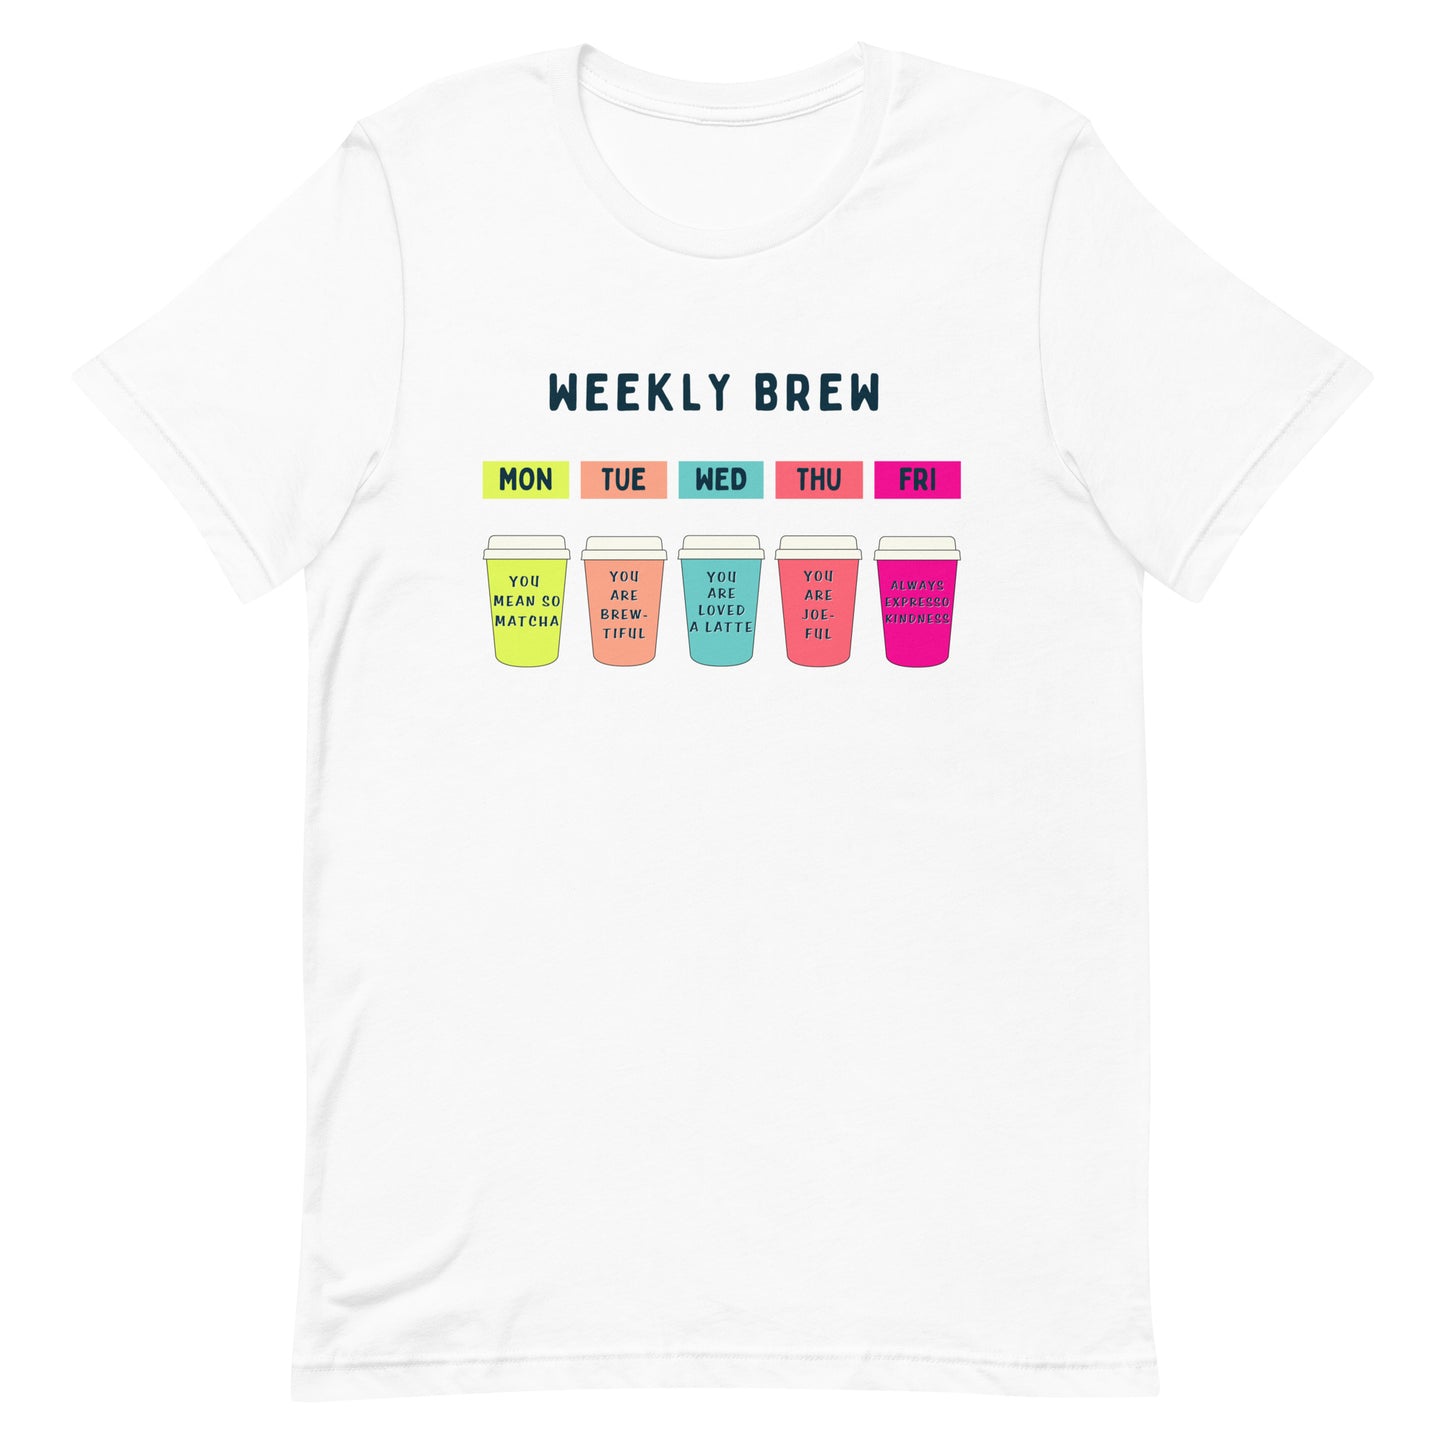 Days of the Week T-shirt